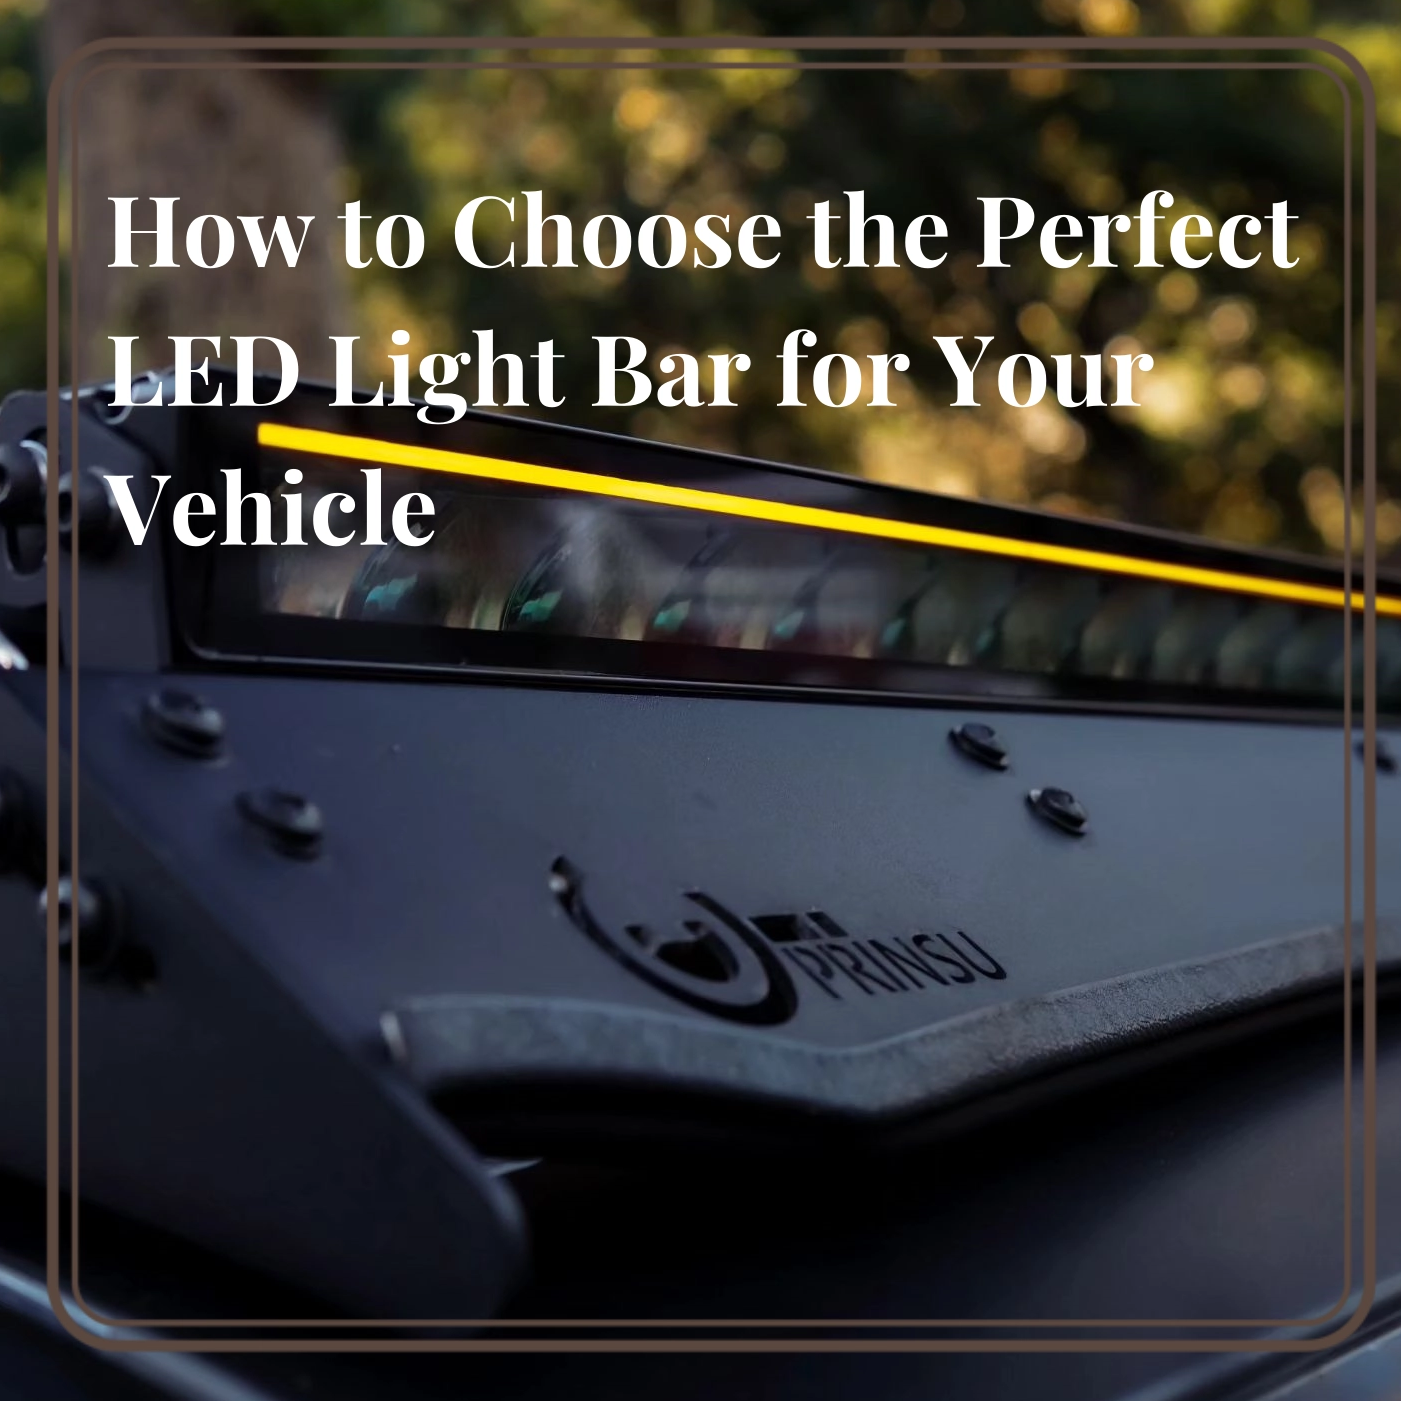 How to Choose the Perfect LED Light Bar for Your Vehicle